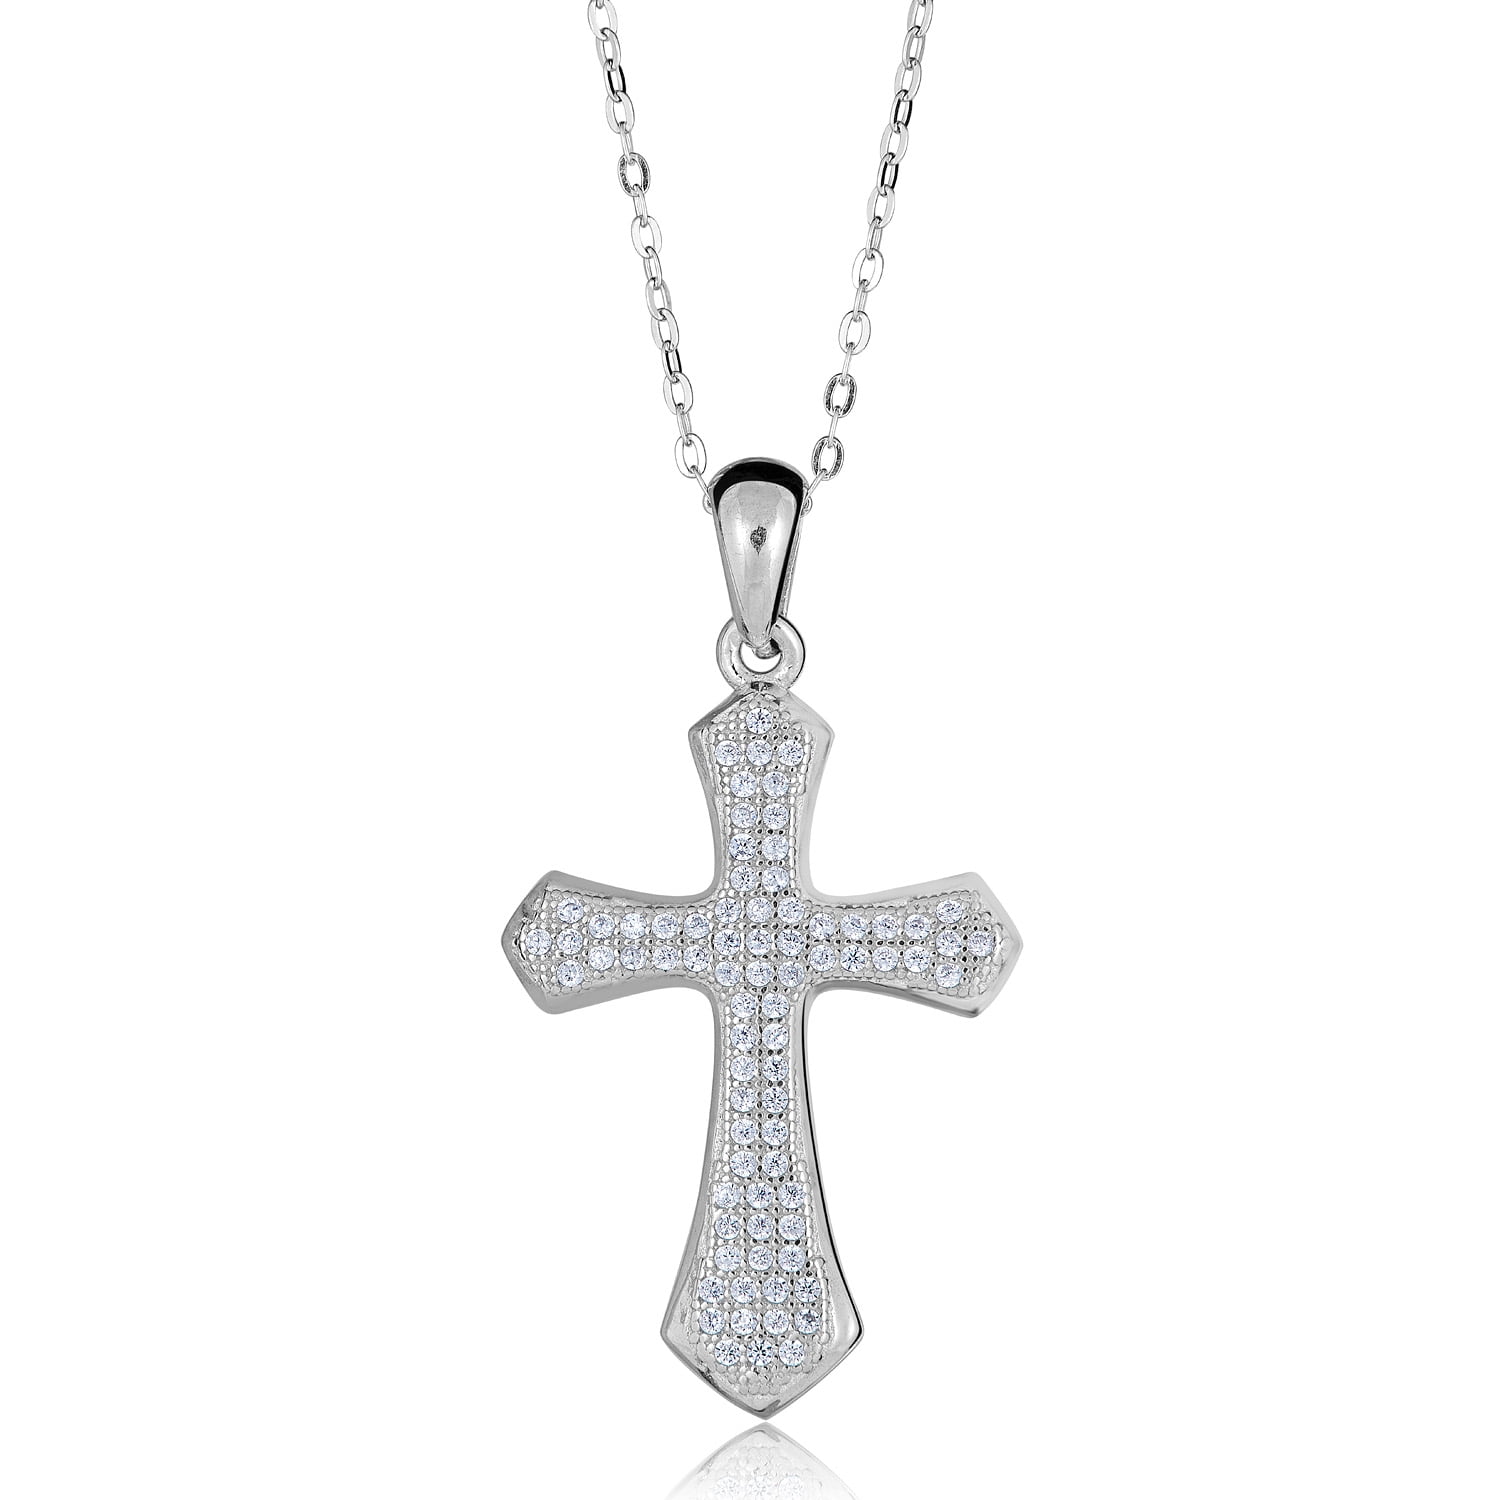 Stamped 925 Sterling Silver CZ Cross Pendant Box Chain 18" Necklace Gift Pouch 